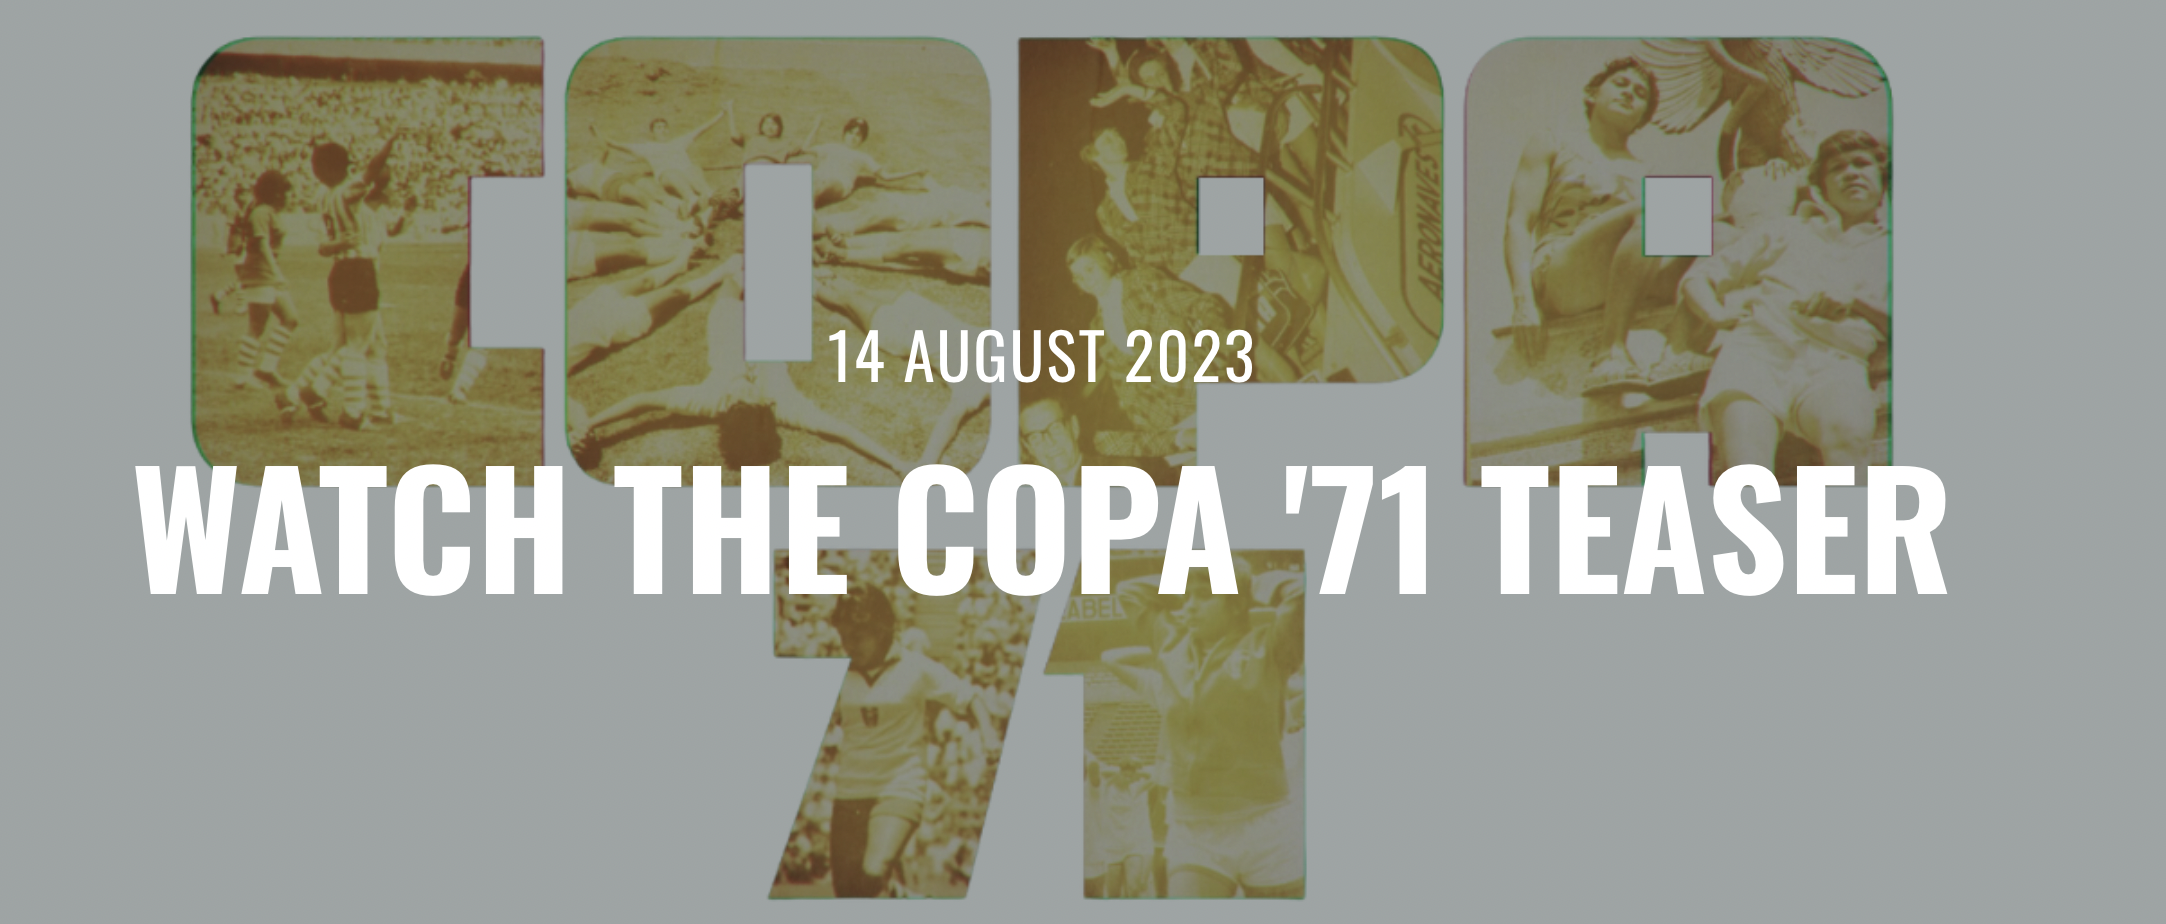 WATCH THE COPA 71 TEASER